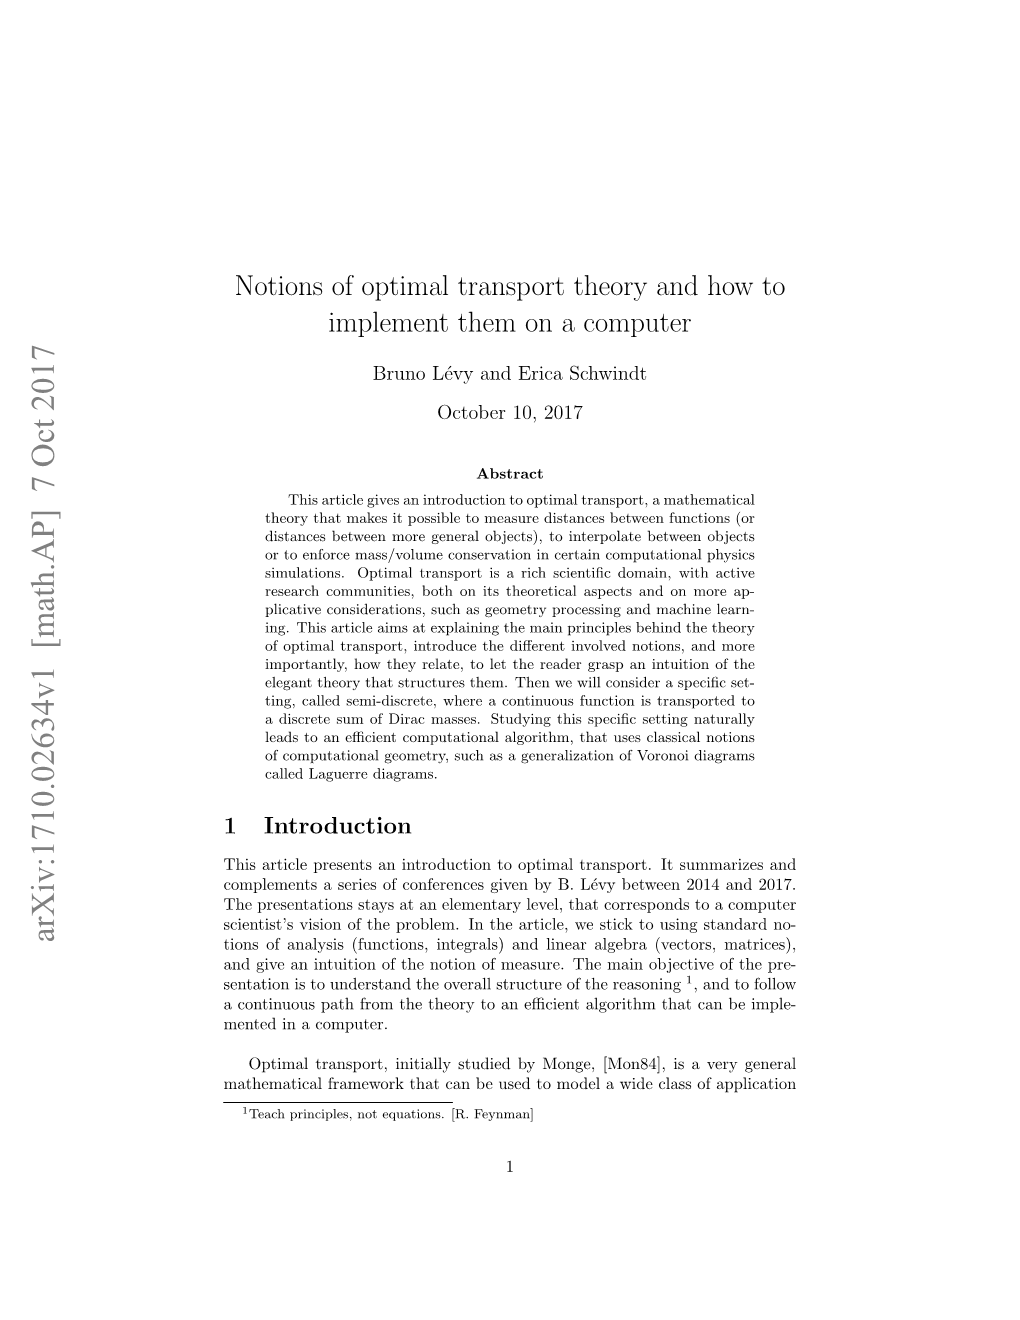 Notions of Optimal Transport Theory and How to Implement Them on a Computer